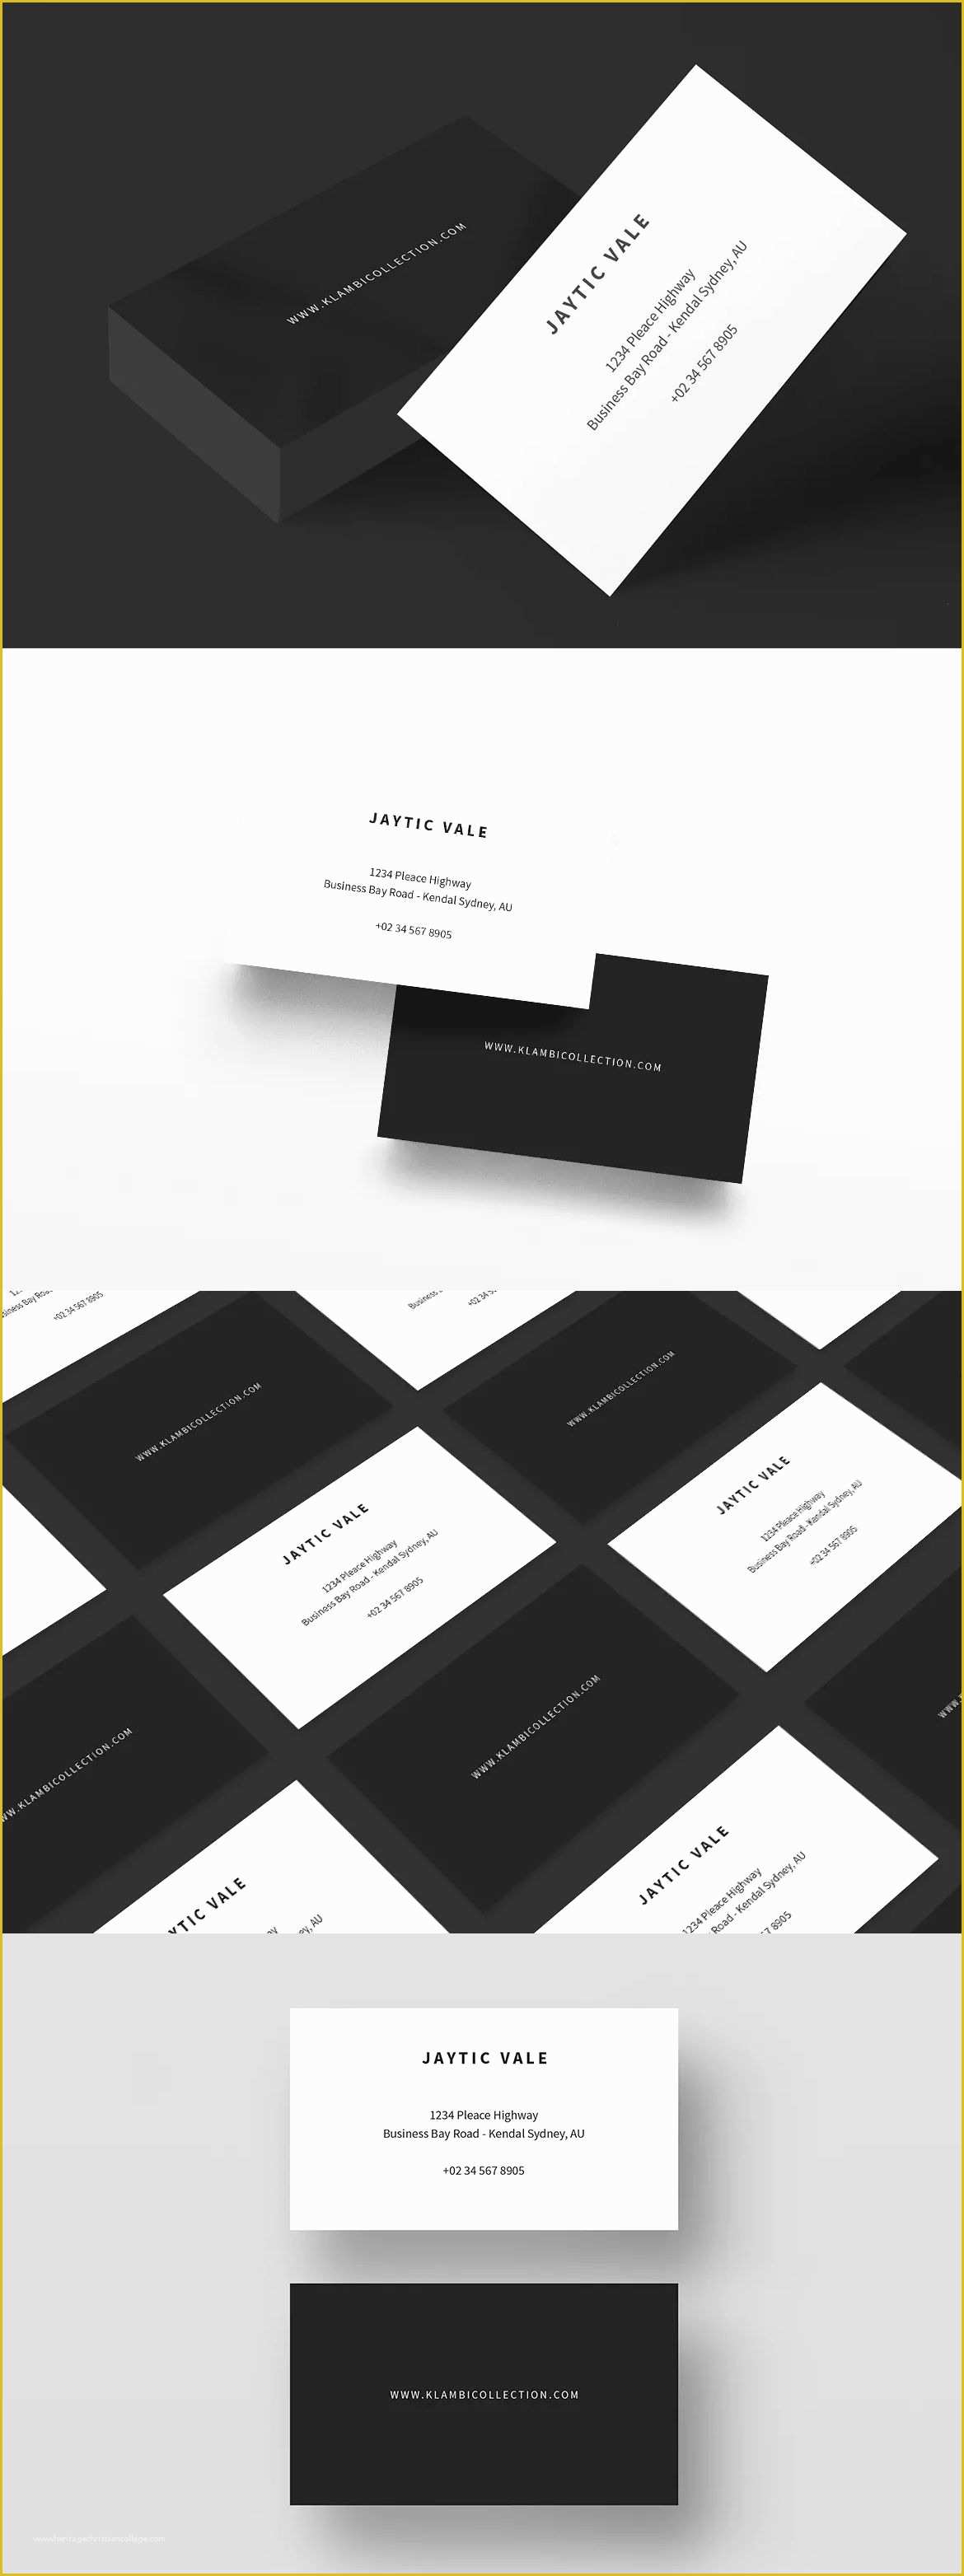 Indesign Business Card Template Free Of Business Card Landscape Template Indesign Indd